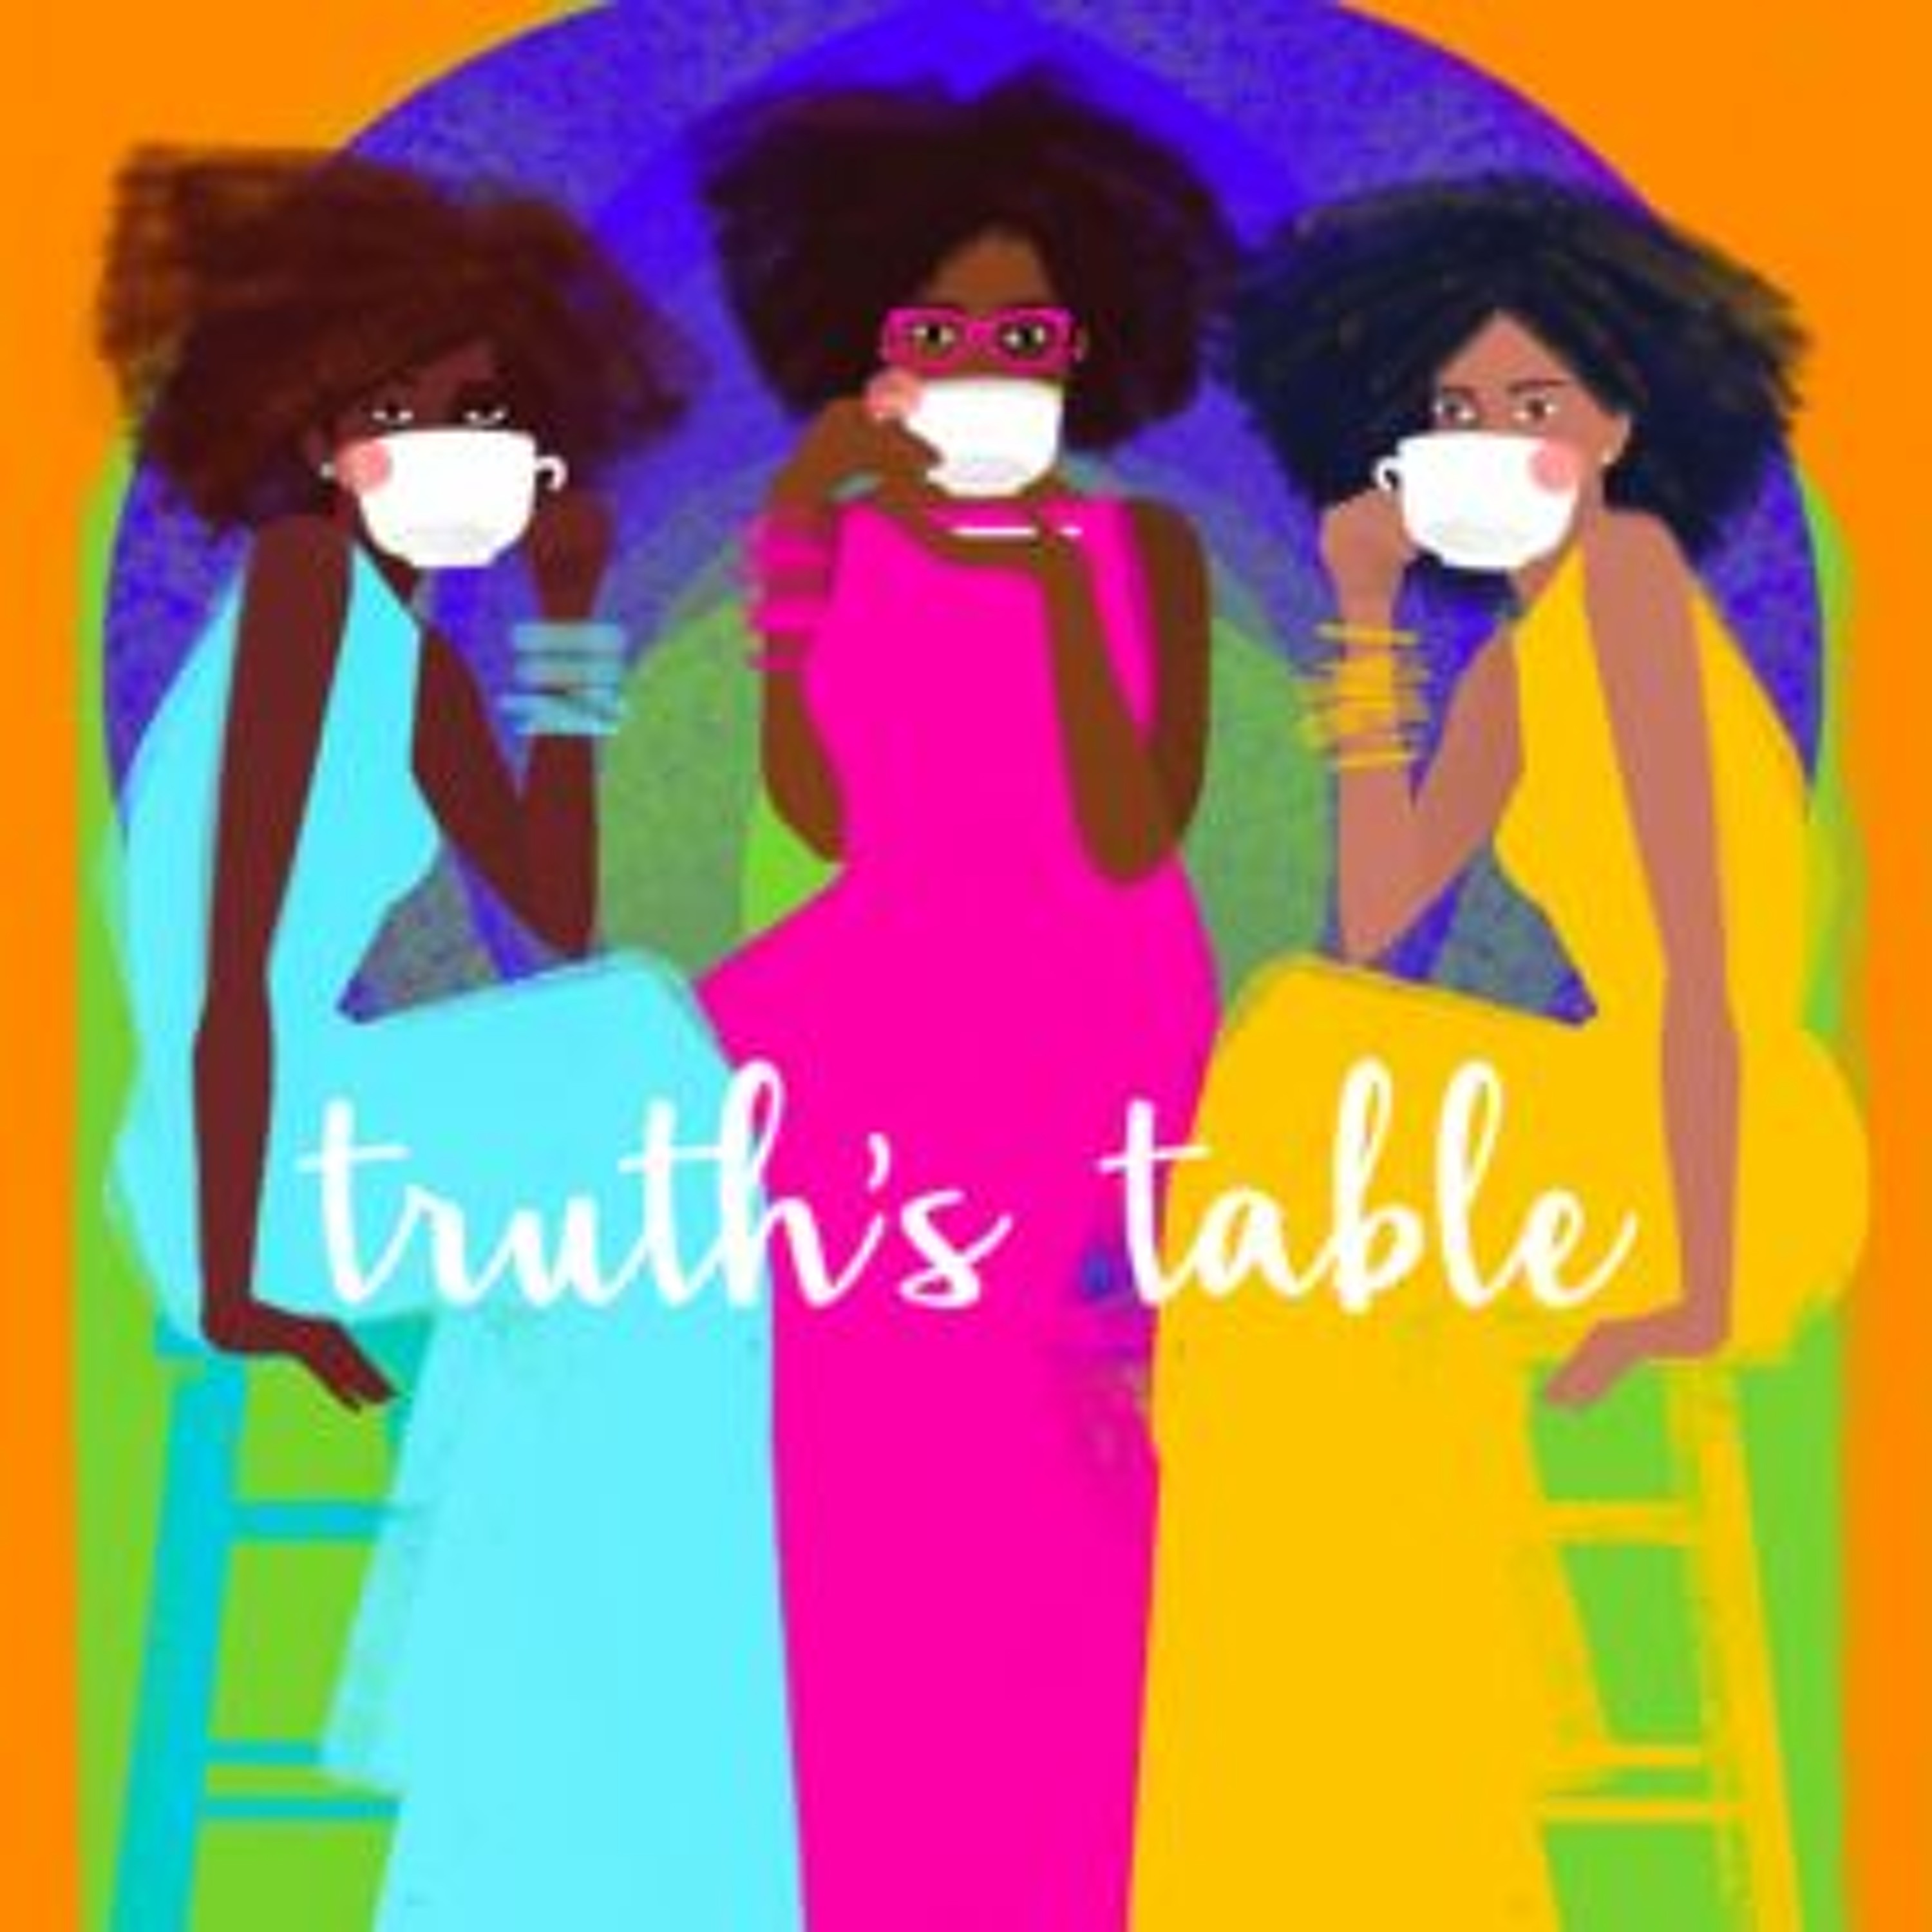 Truth’s Table’s Classroom: Respectability Politics Reimagined